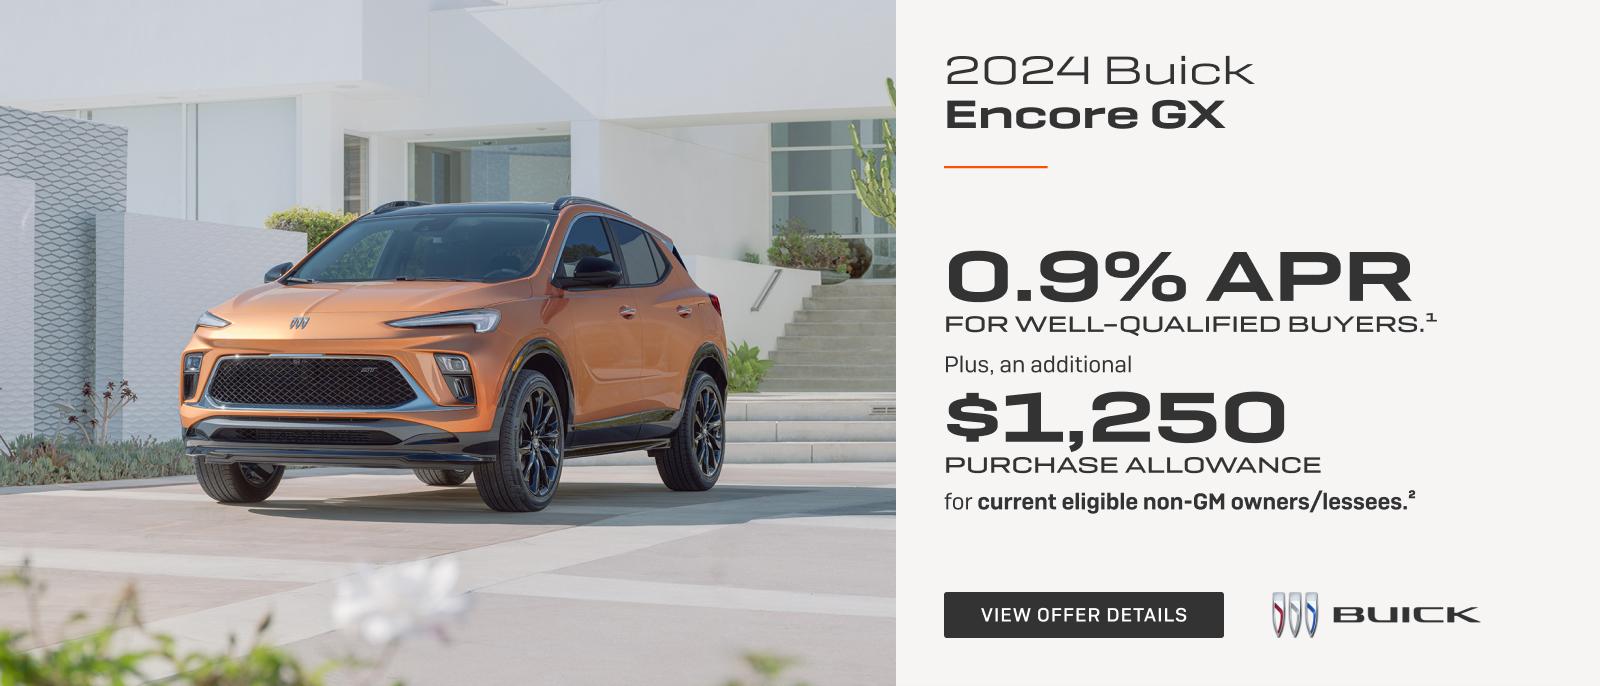 0.9% APR 
FOR WELL-QUALIFIED BUYERS.1

Plus, an additional $1,250 PURCHASE ALLOWANCE for current eligible non-GM owners/lessees.2